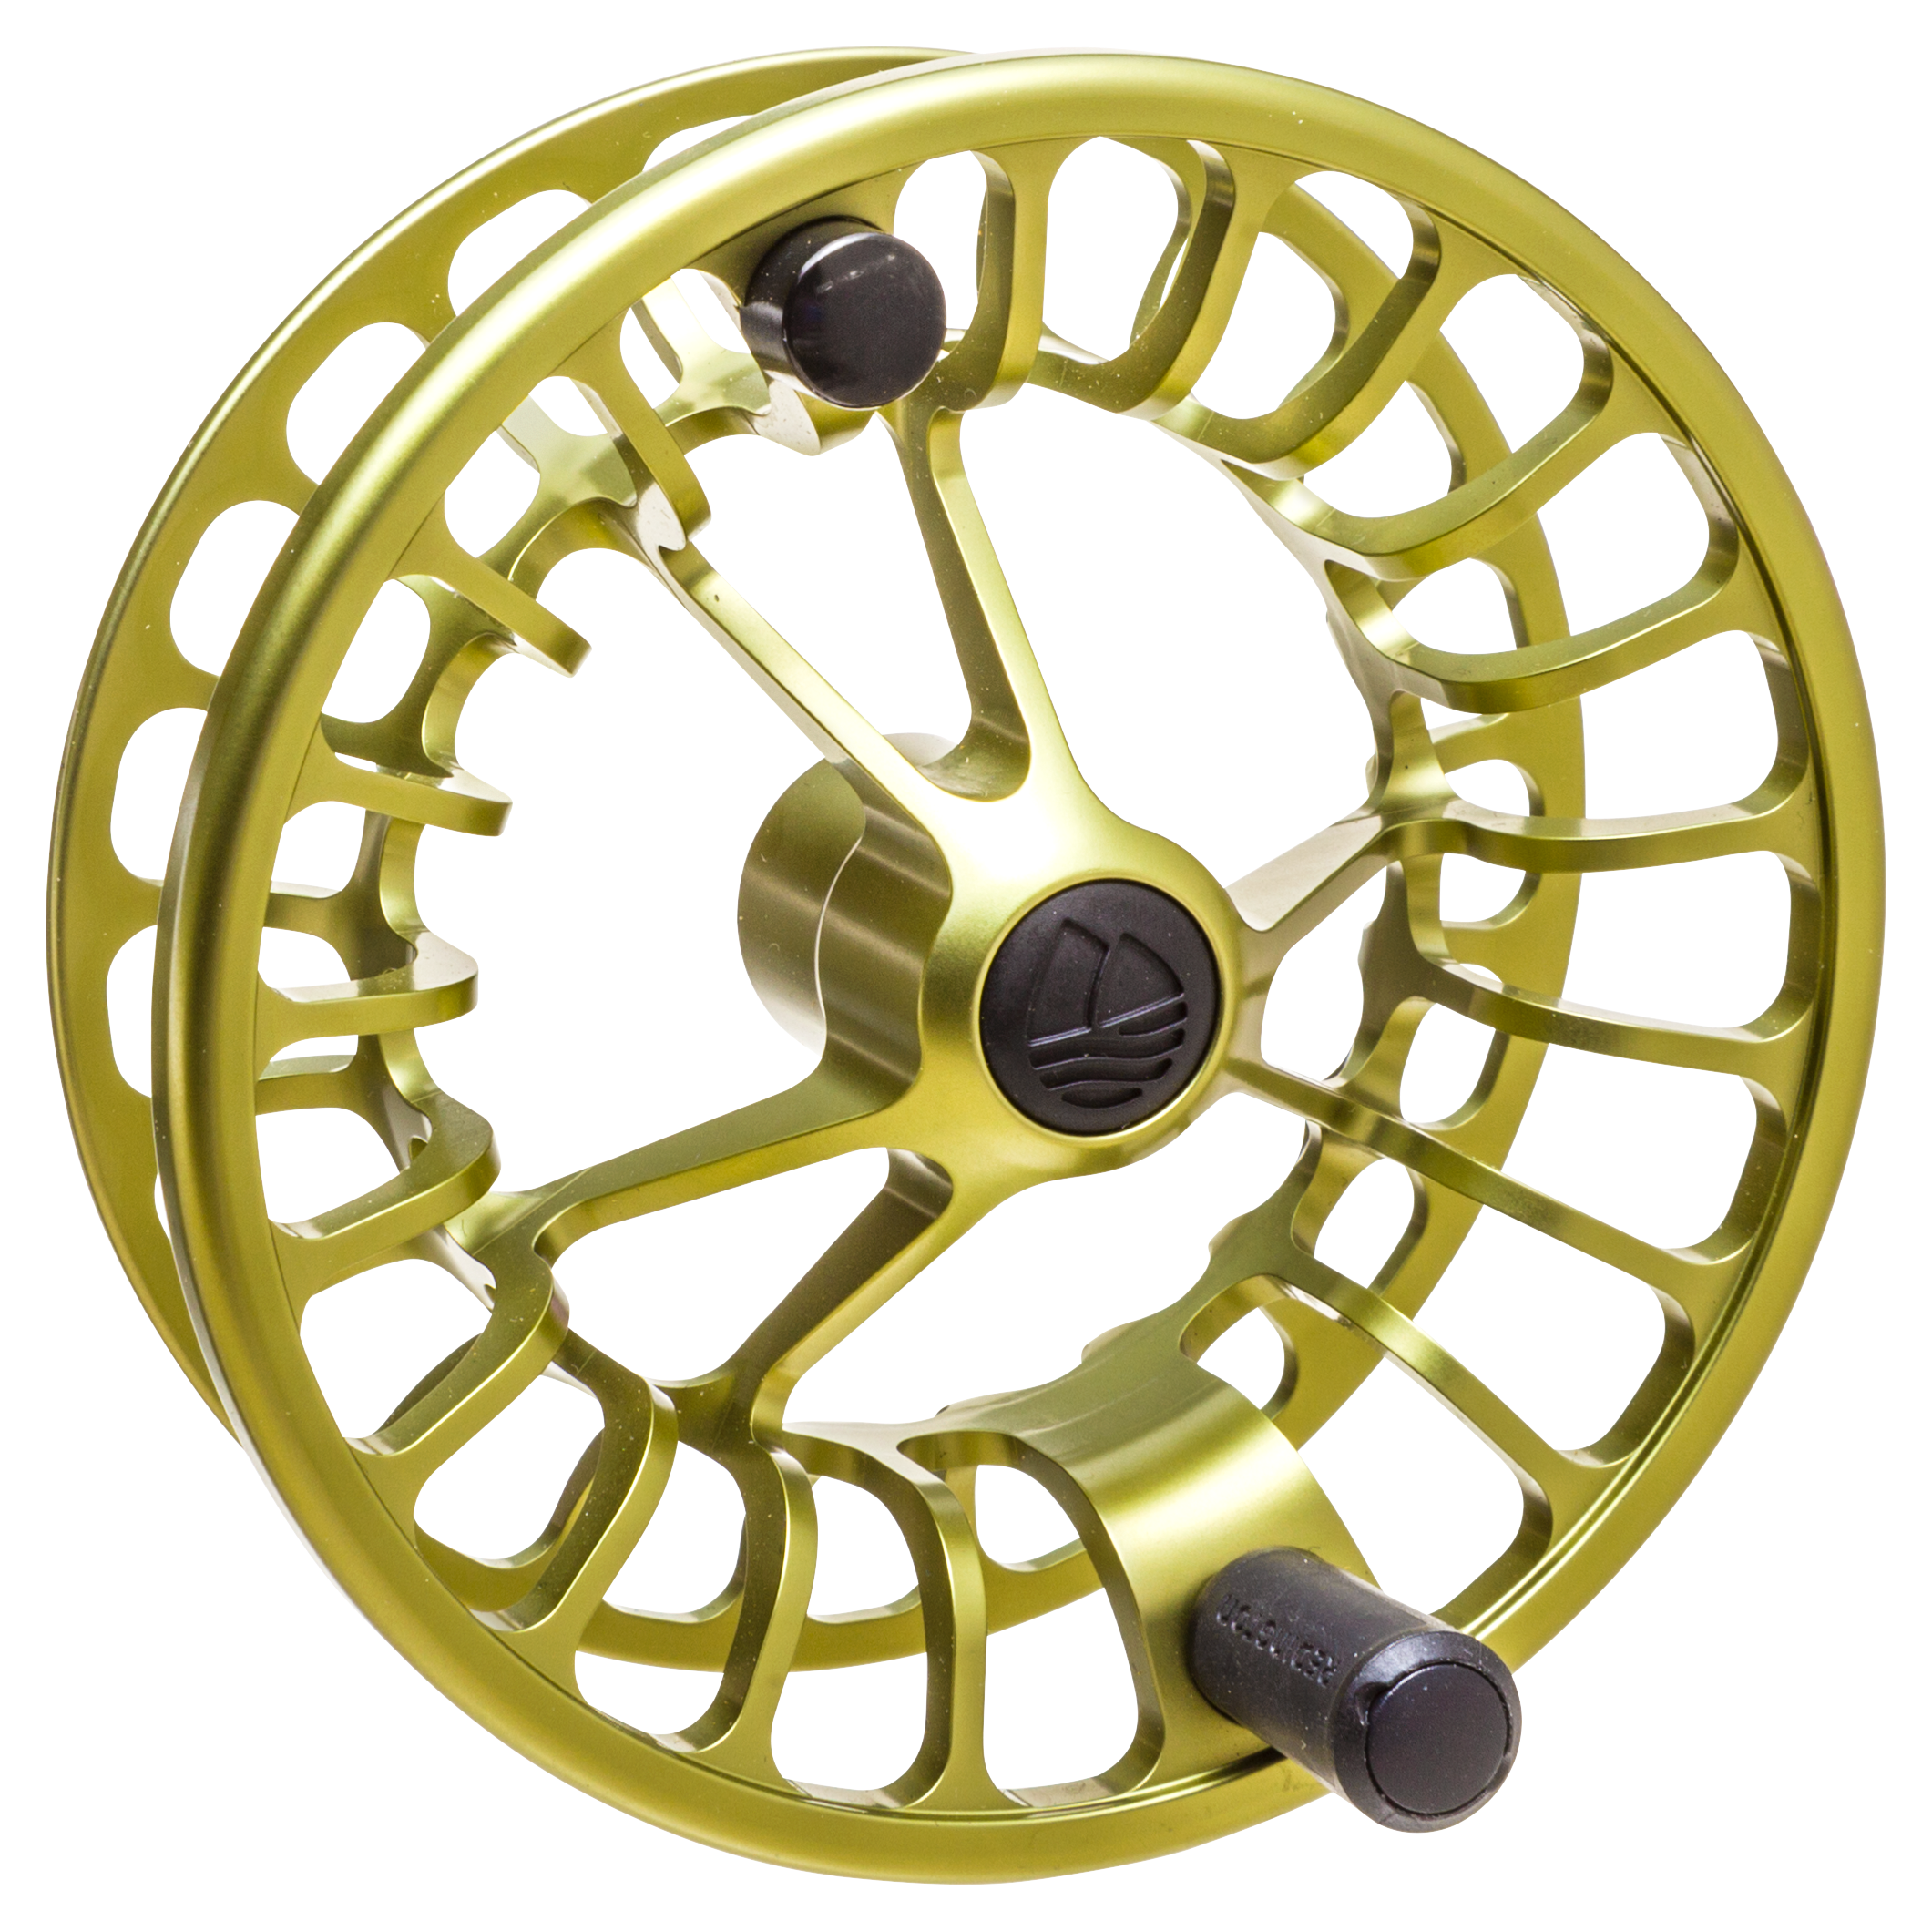 NEW $250 REDINGTON Rise Iii 9/10 Fly Fishing Reel Olive--Closeout